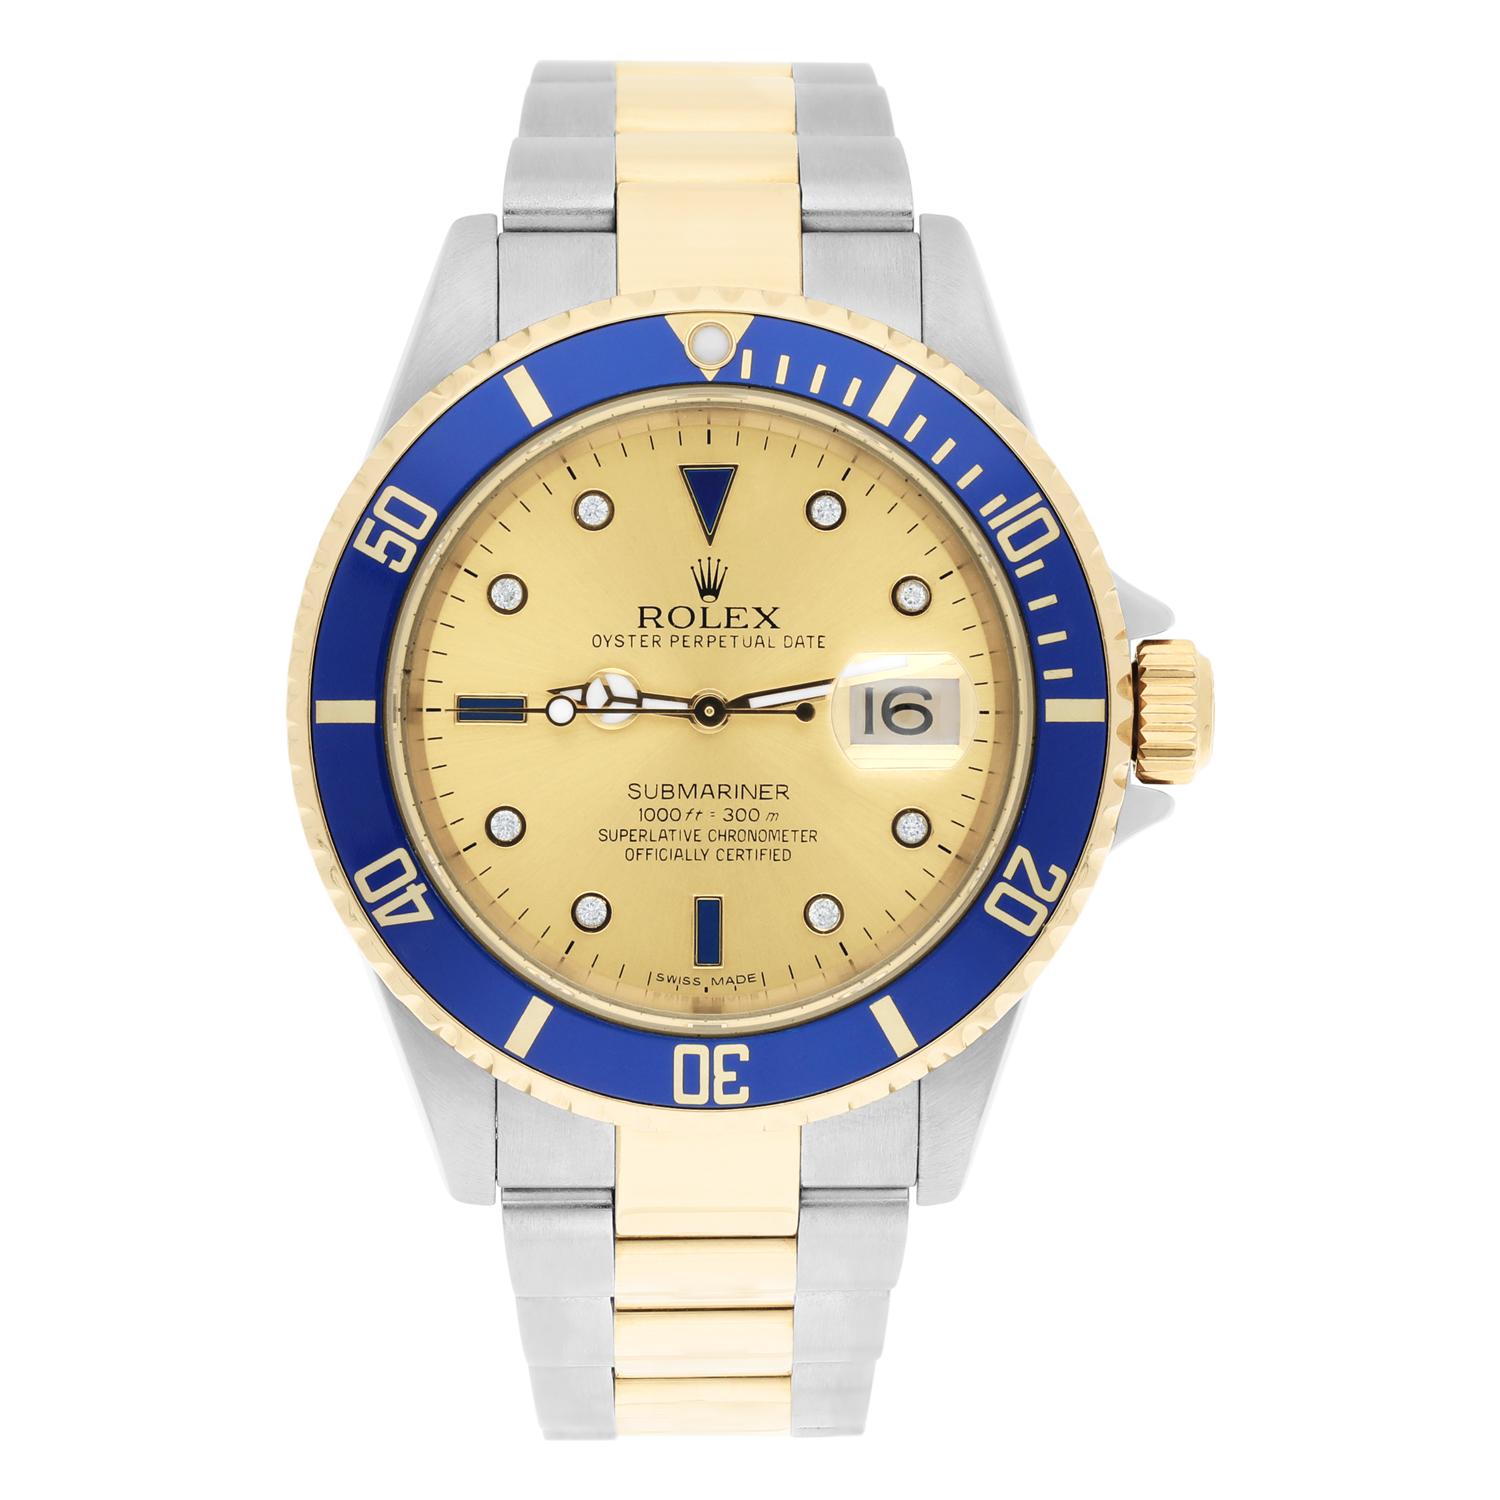 This Rolex Submariner watch is a true luxury item for any man. With a multicolored 18K yellow gold and stainless steel band/strap, and an 18K yellow gold and stainless steel case color, this watch exudes class and style. The champagne serti dial is